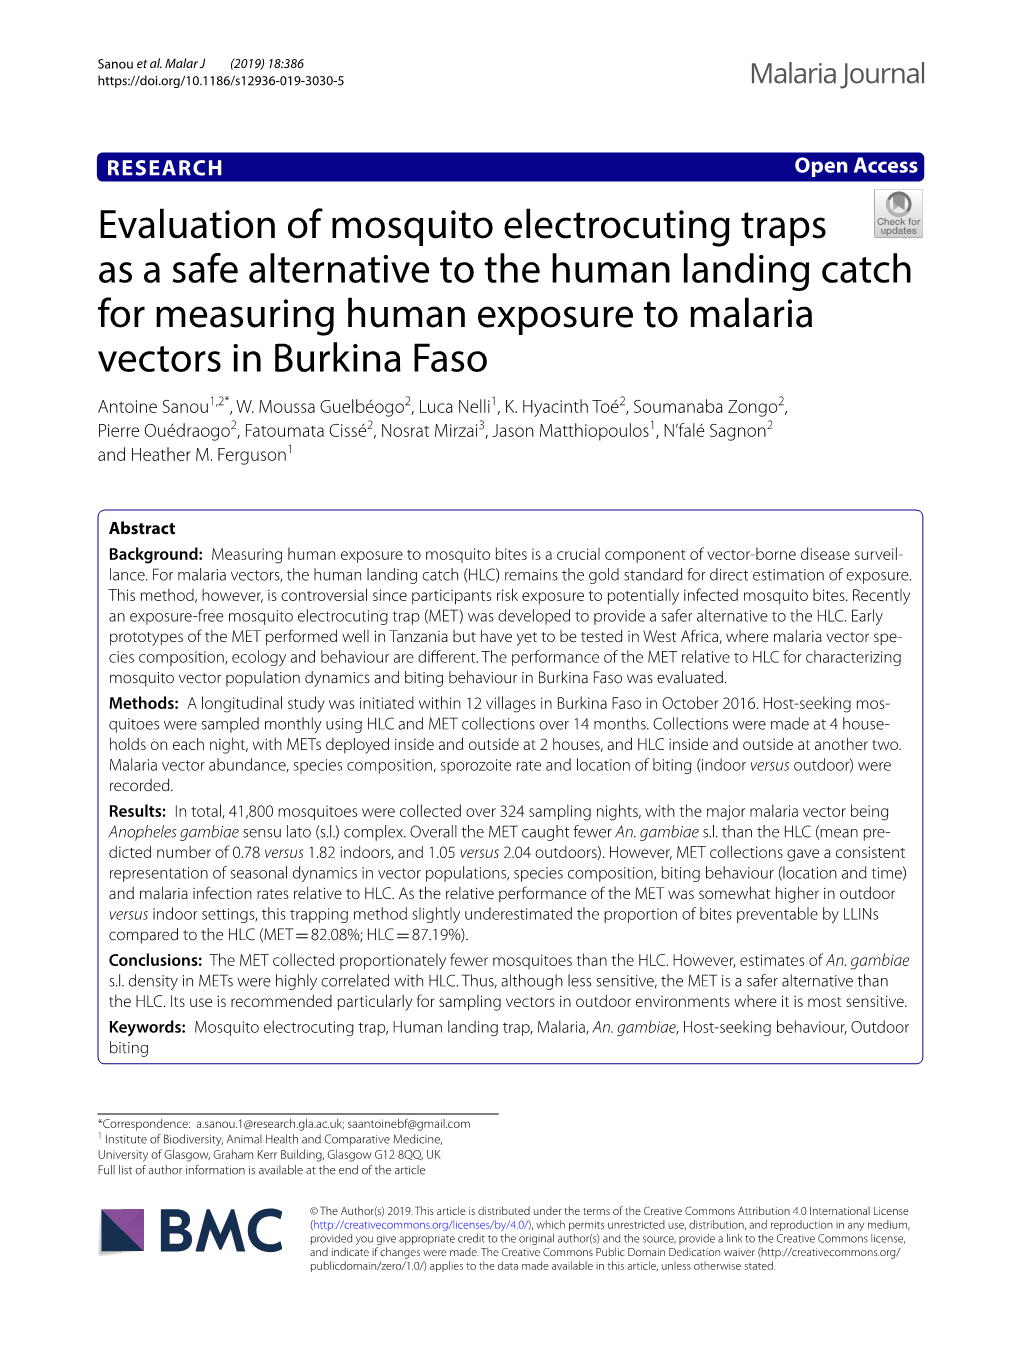 Evaluation of Mosquito Electrocuting Traps As a Safe Alternative To